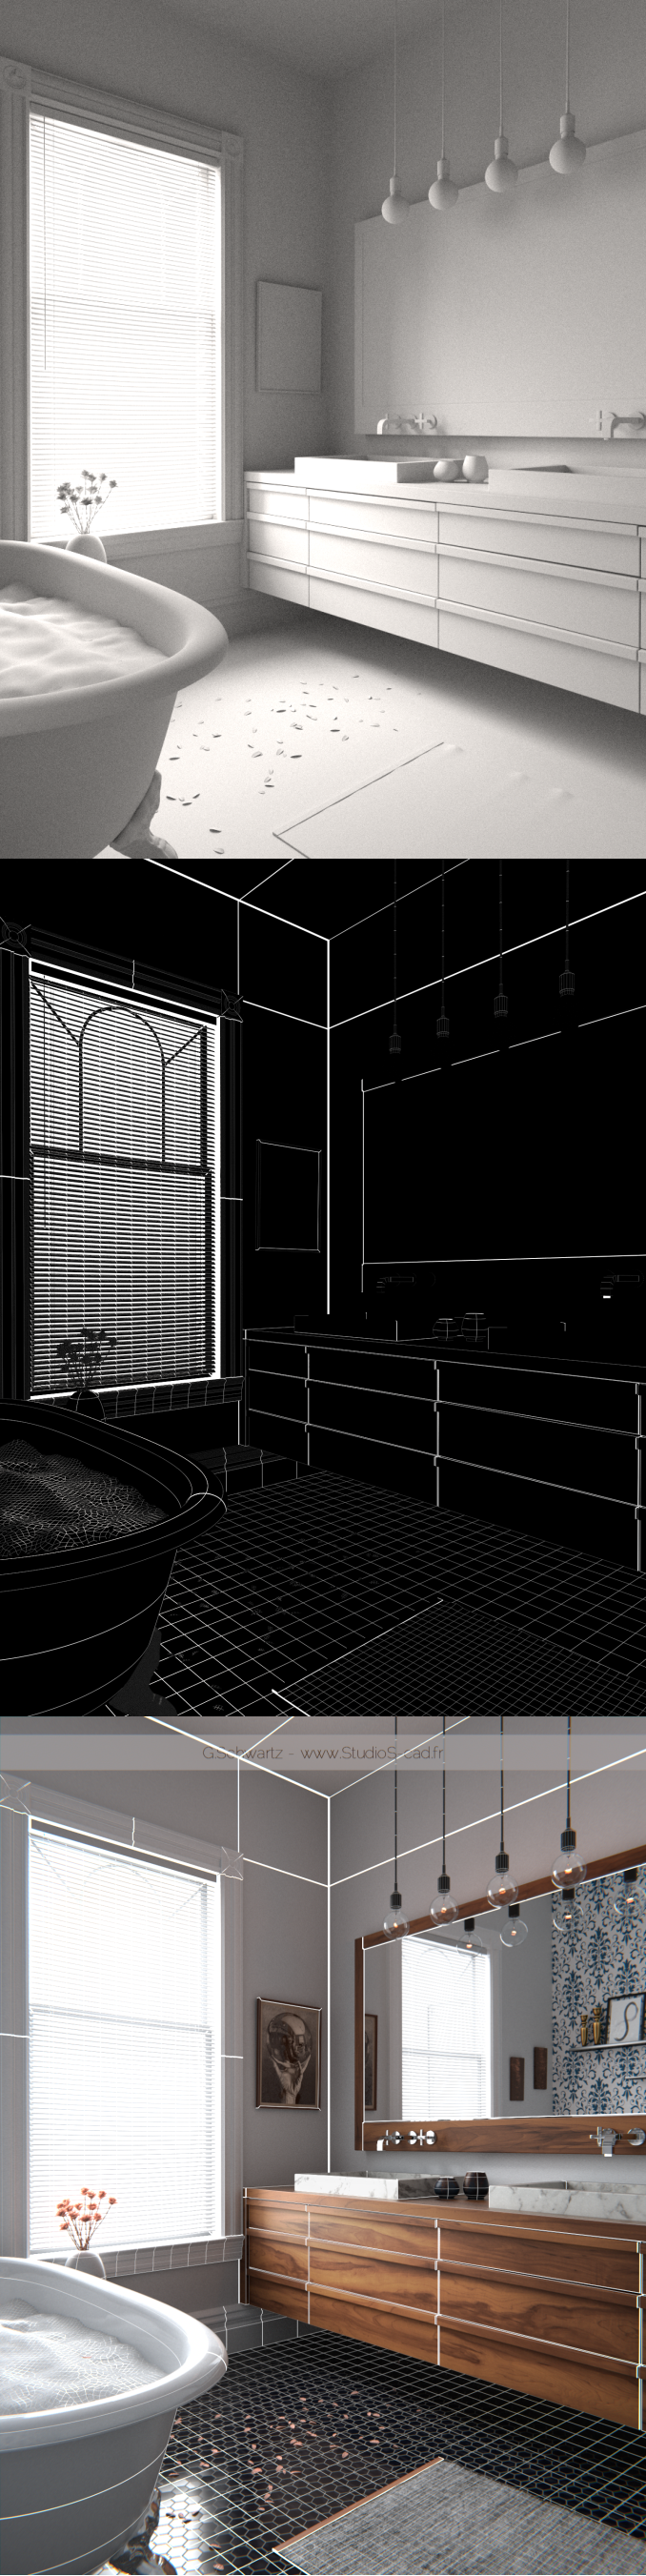 WIP Mareck [Modelisation organique - corps humain] - Page 5 Bathroom_tri_small